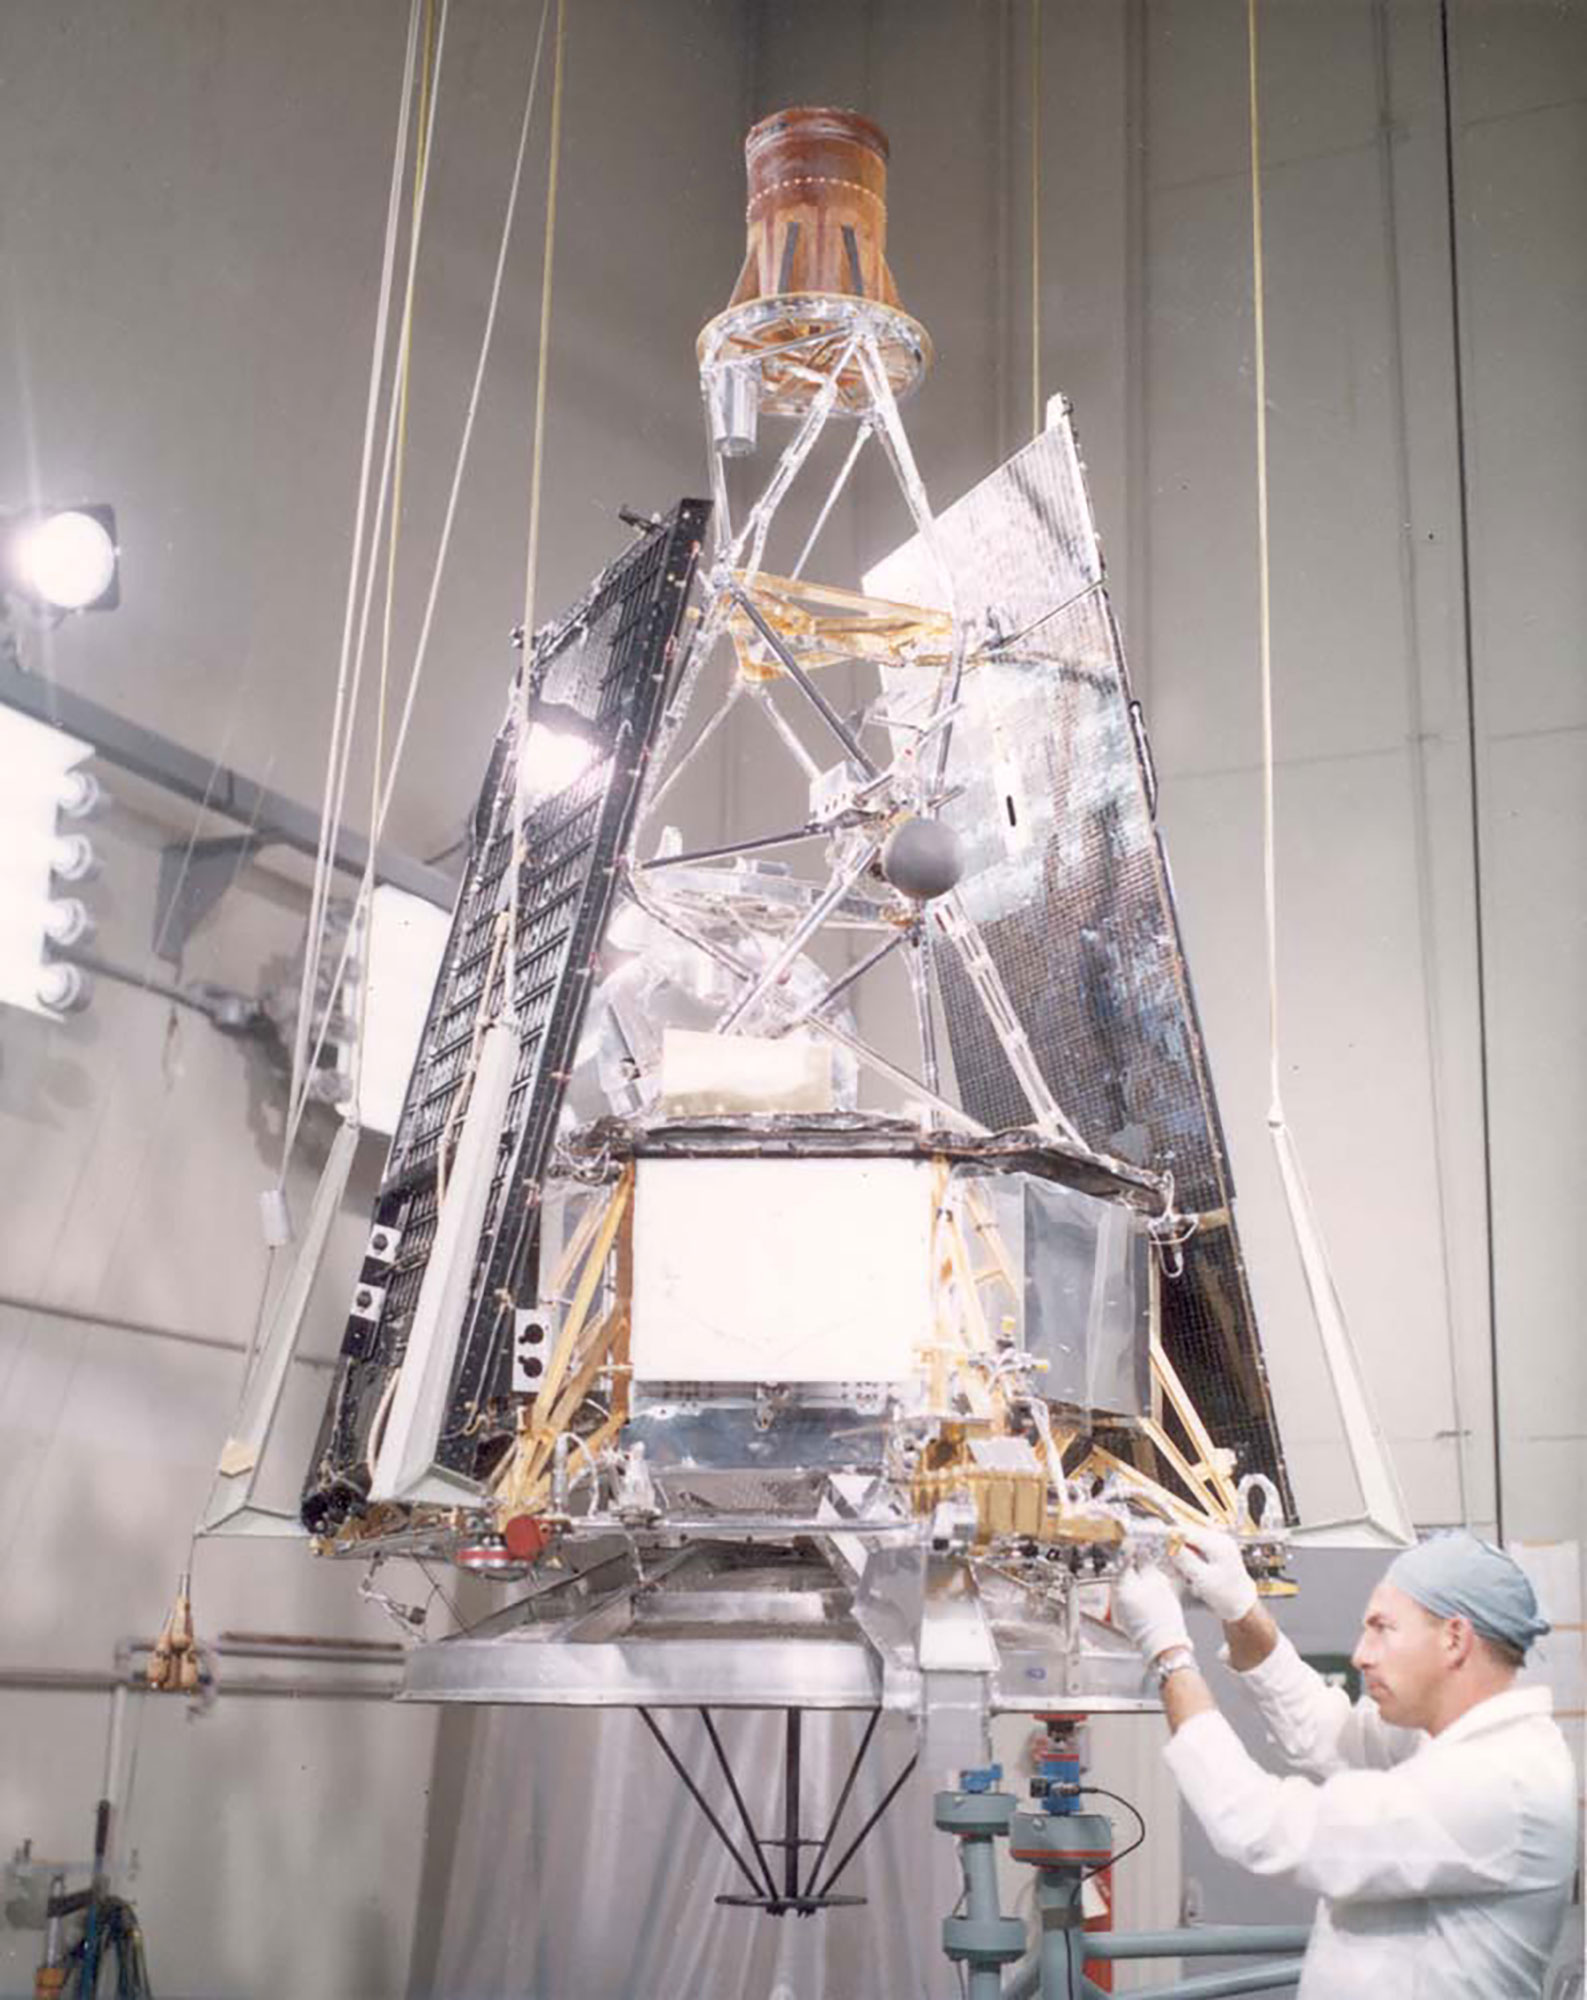 Lot #9669 Major Subassemblies and Components from Mankind's First Interplanetary Spacecraft (Mariner 2) - Image 29